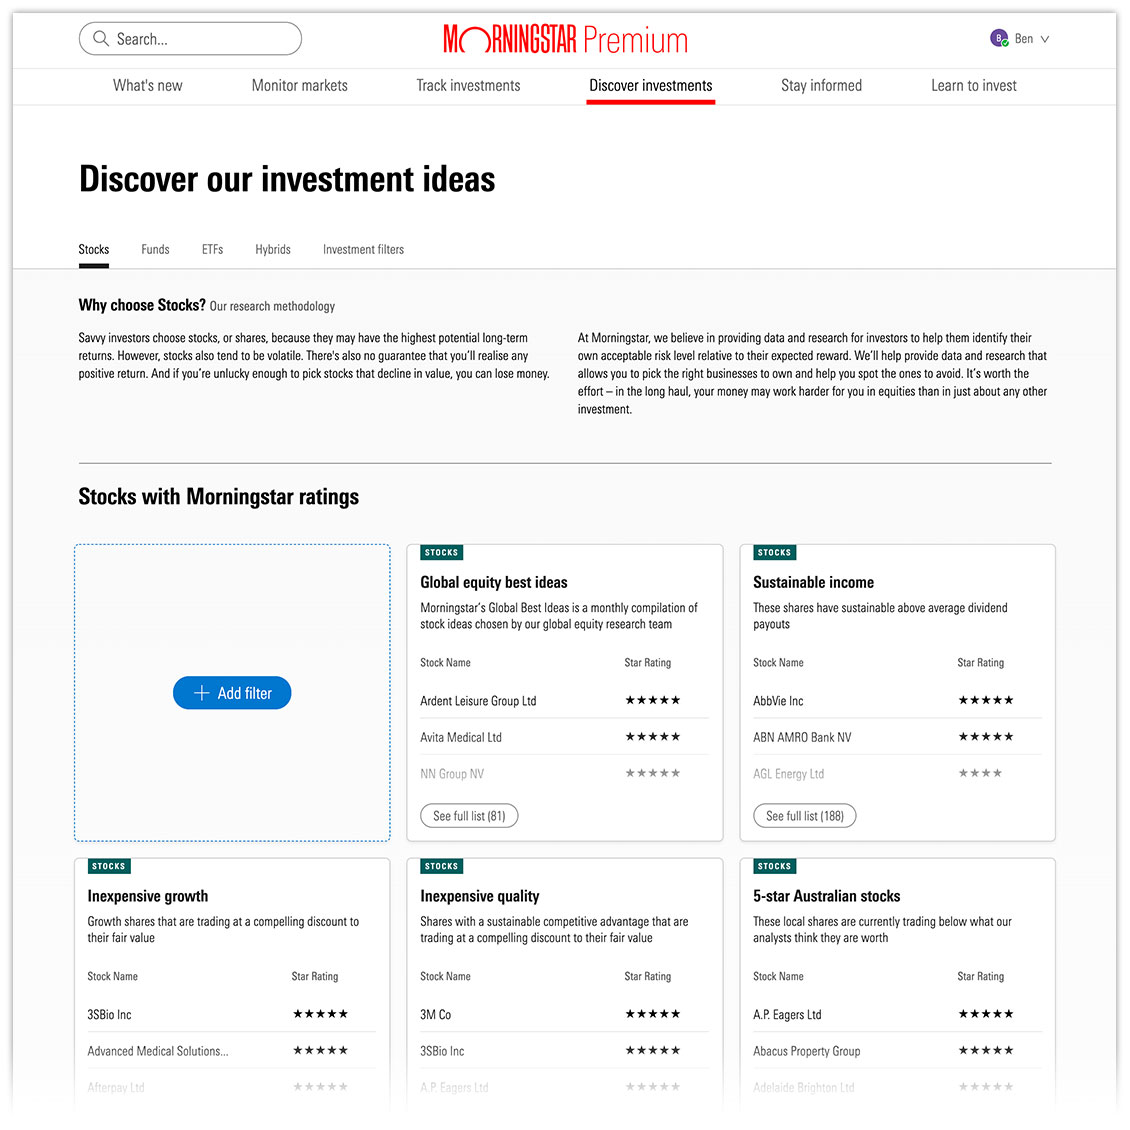 Image of the Discover Investments page